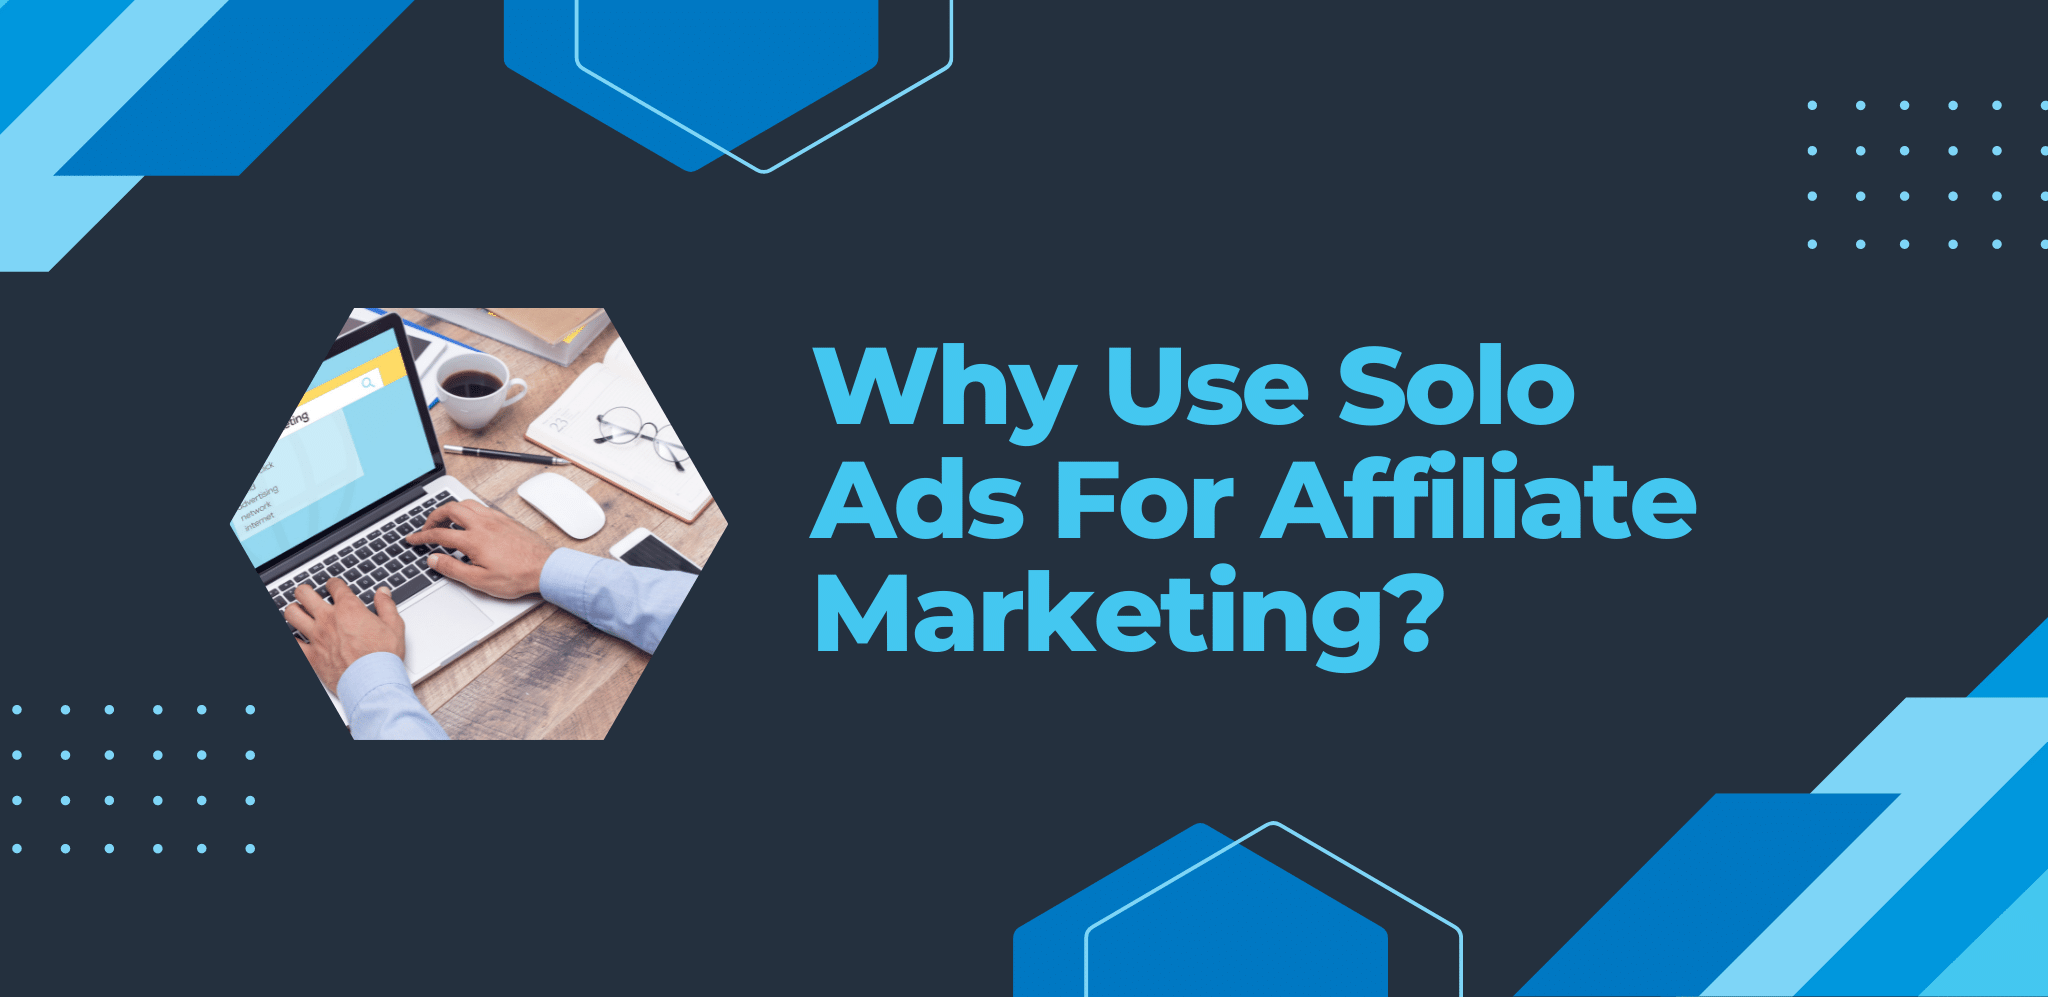 Why Use Solo Ads For Affiliate Marketing